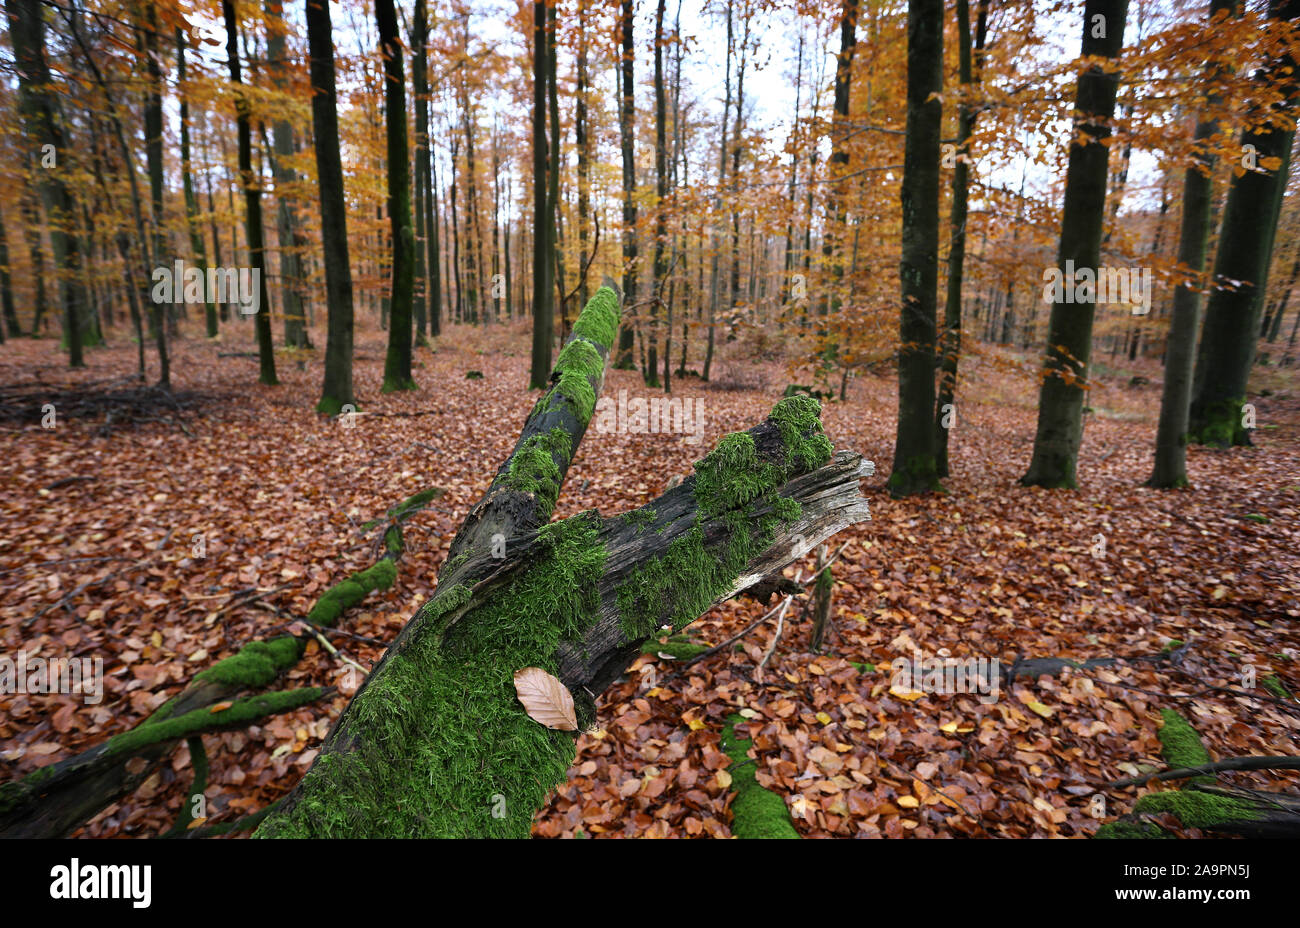 17 November 2019, Bavaria, Rohrbrunn: A rotten tree covered with moss lies in autumn leaves. Photo: Karl-Josef Hildenbrand/dpa Stock Photo